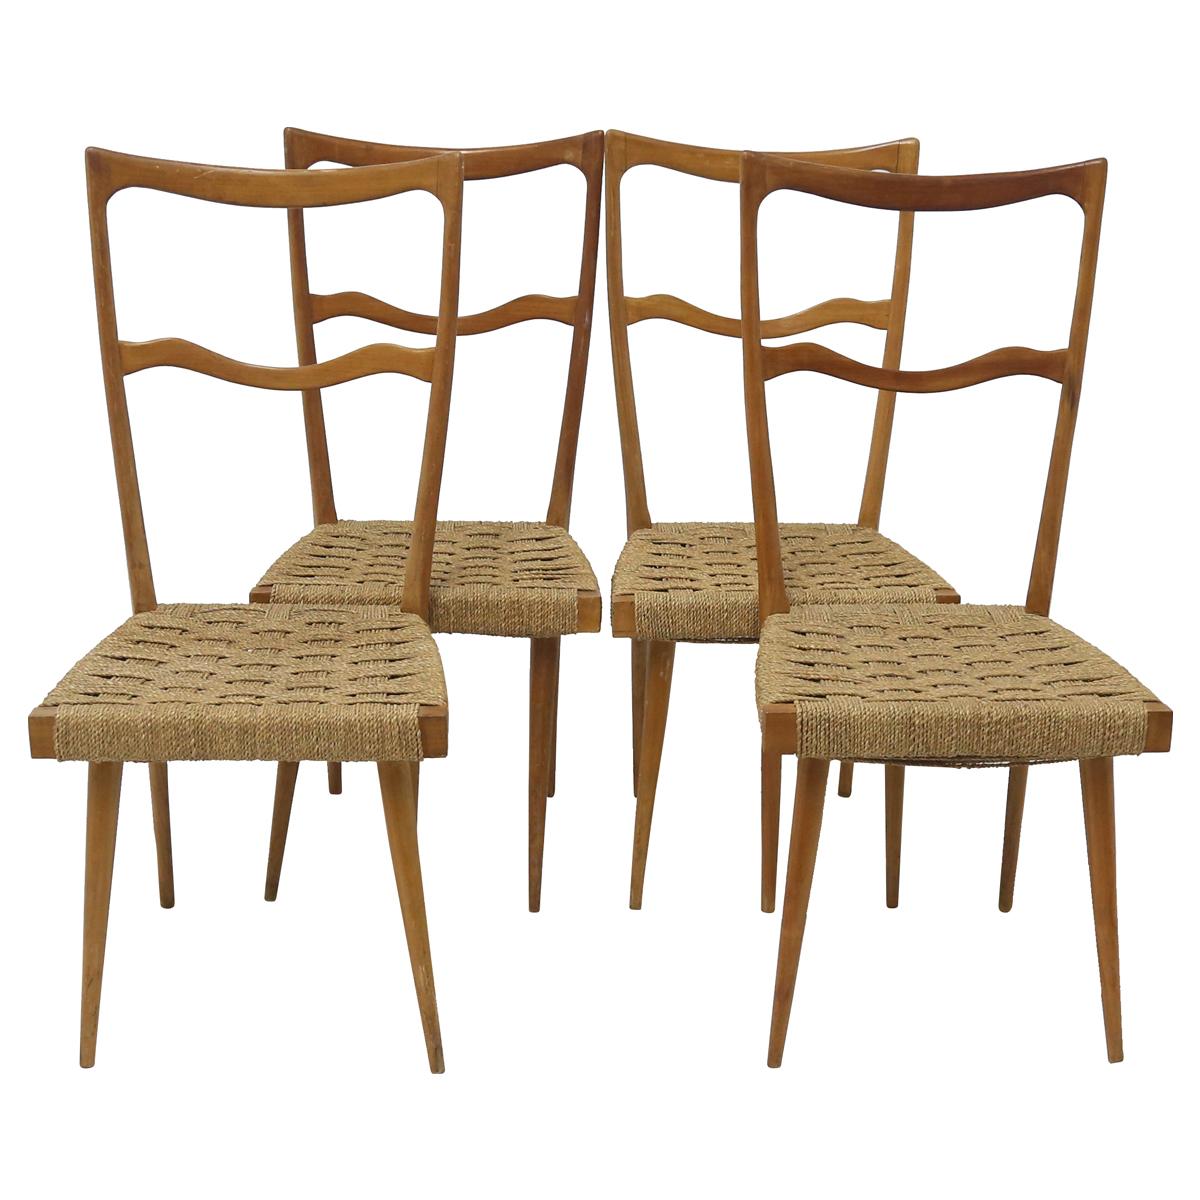 Mid-Century Modern Set of 4 Italian Ladder Back Chairs in the Manner of Gio Ponti